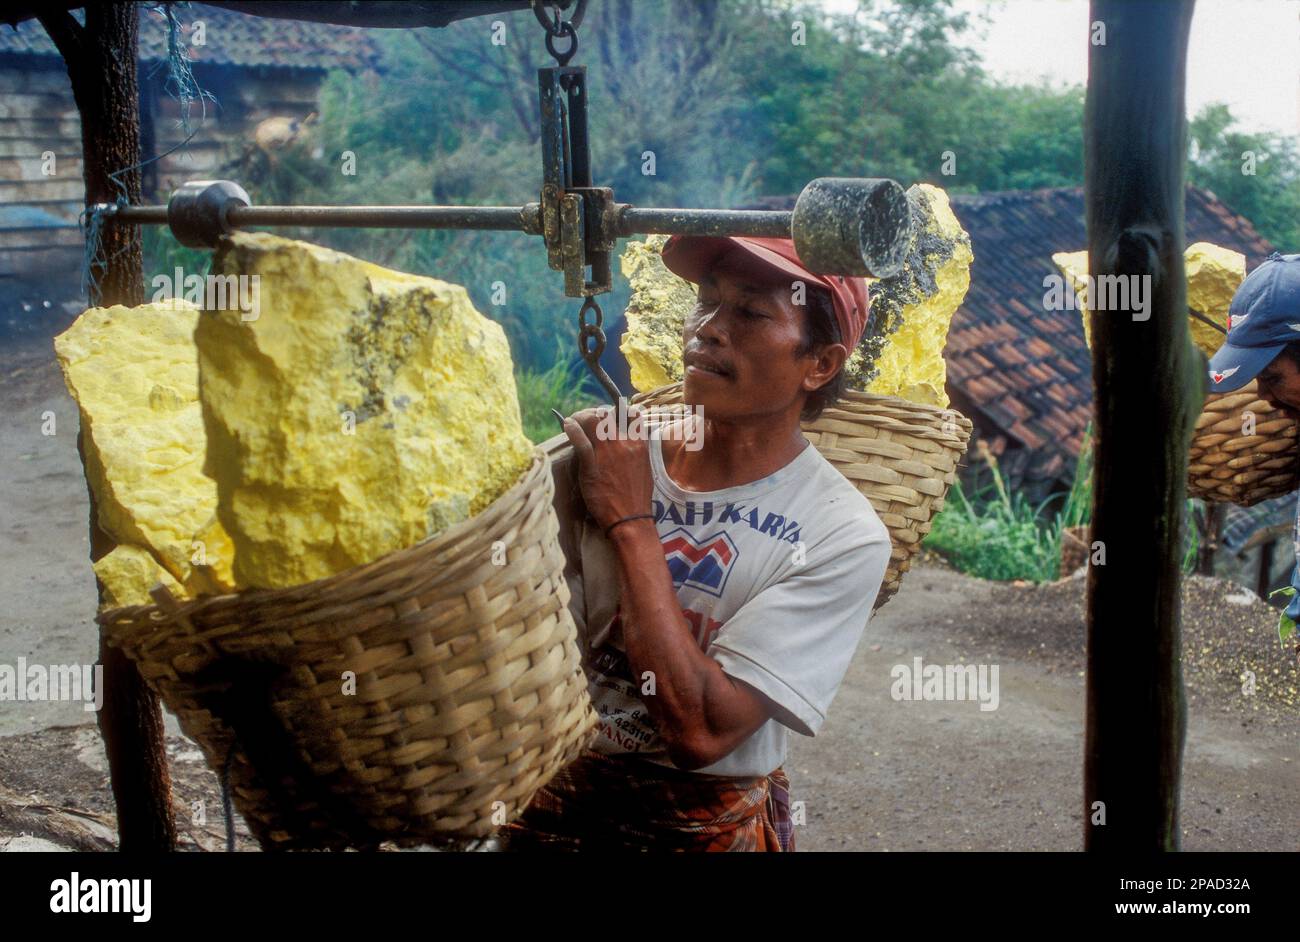 A worker tallies his load of rock sulphur from Ijen Crater, East Java, Indonesia Stock Photo